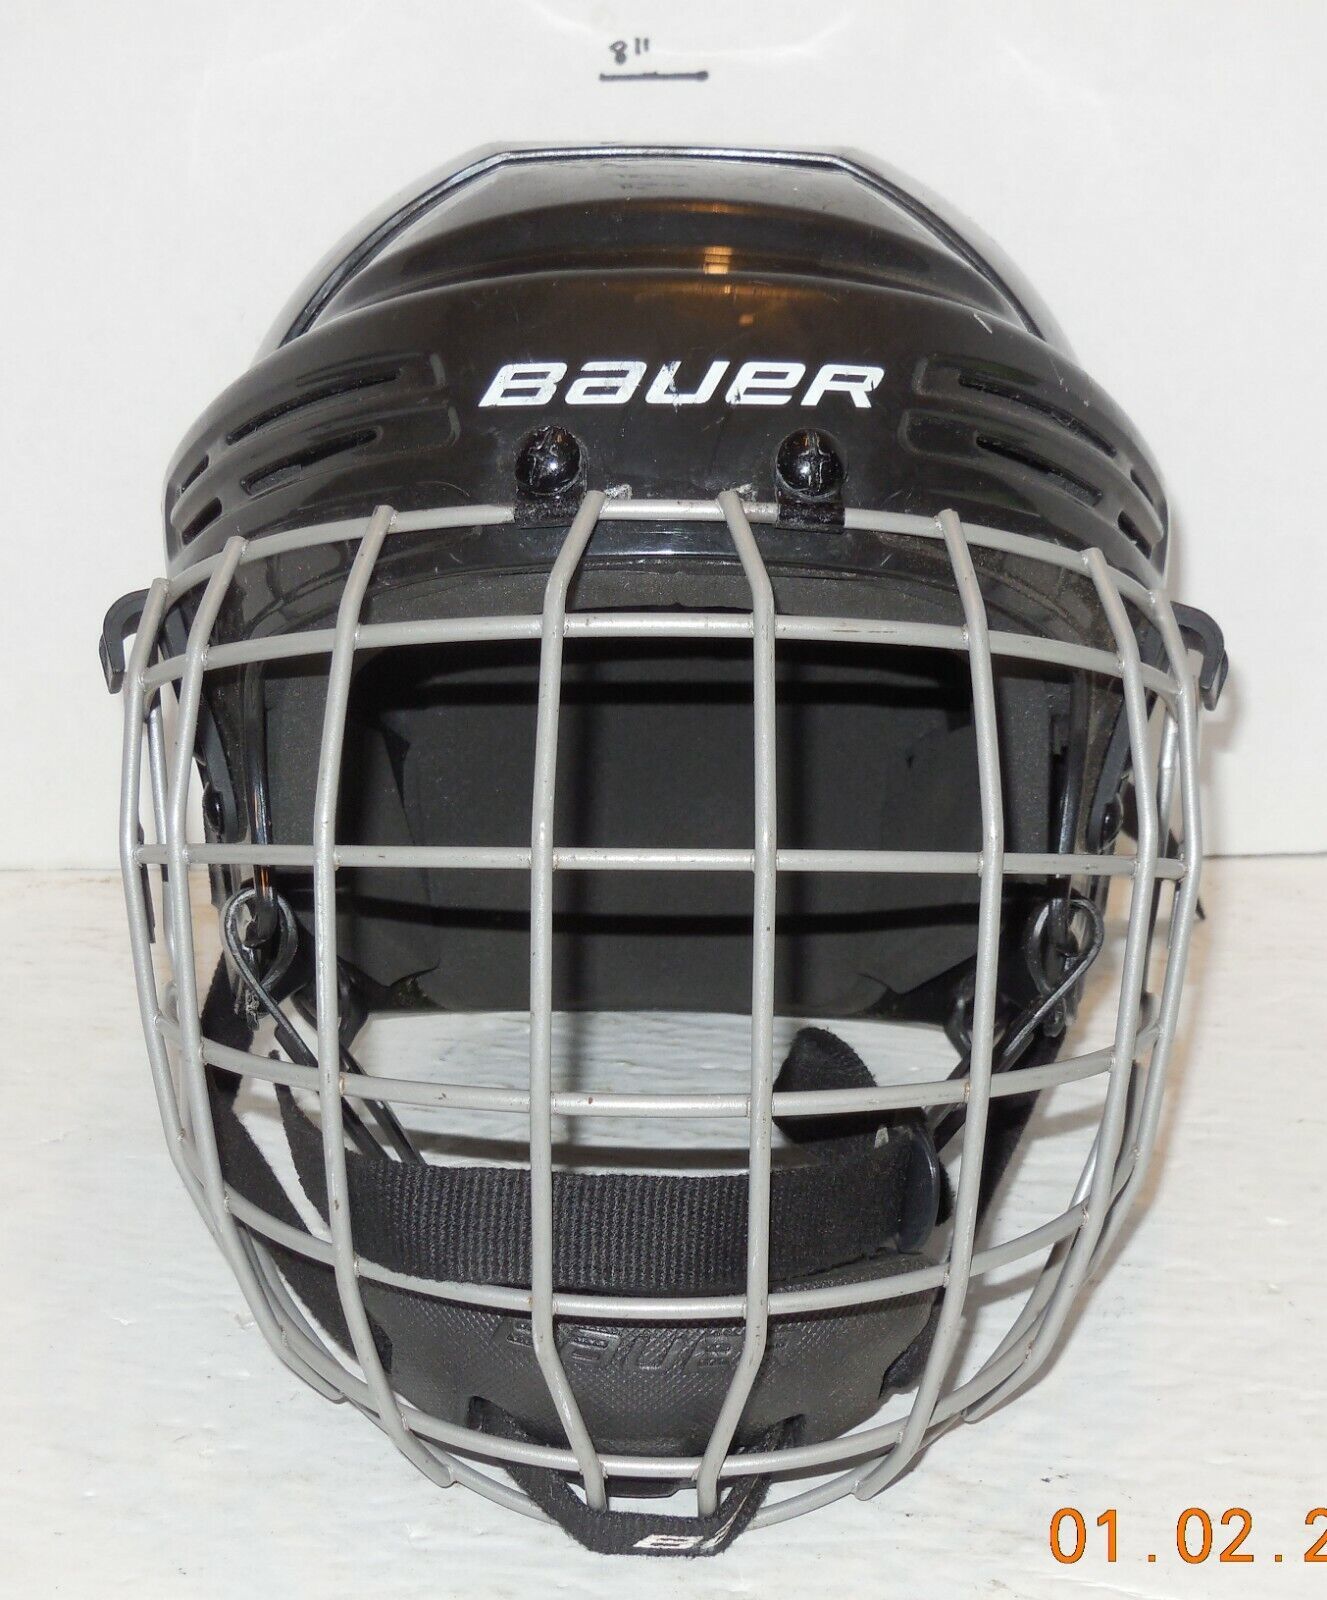 Bauer BHH2100S Ice hockey Black Helmet Size Small Cage 6 1/2" TO 7 1/8" - $62.77